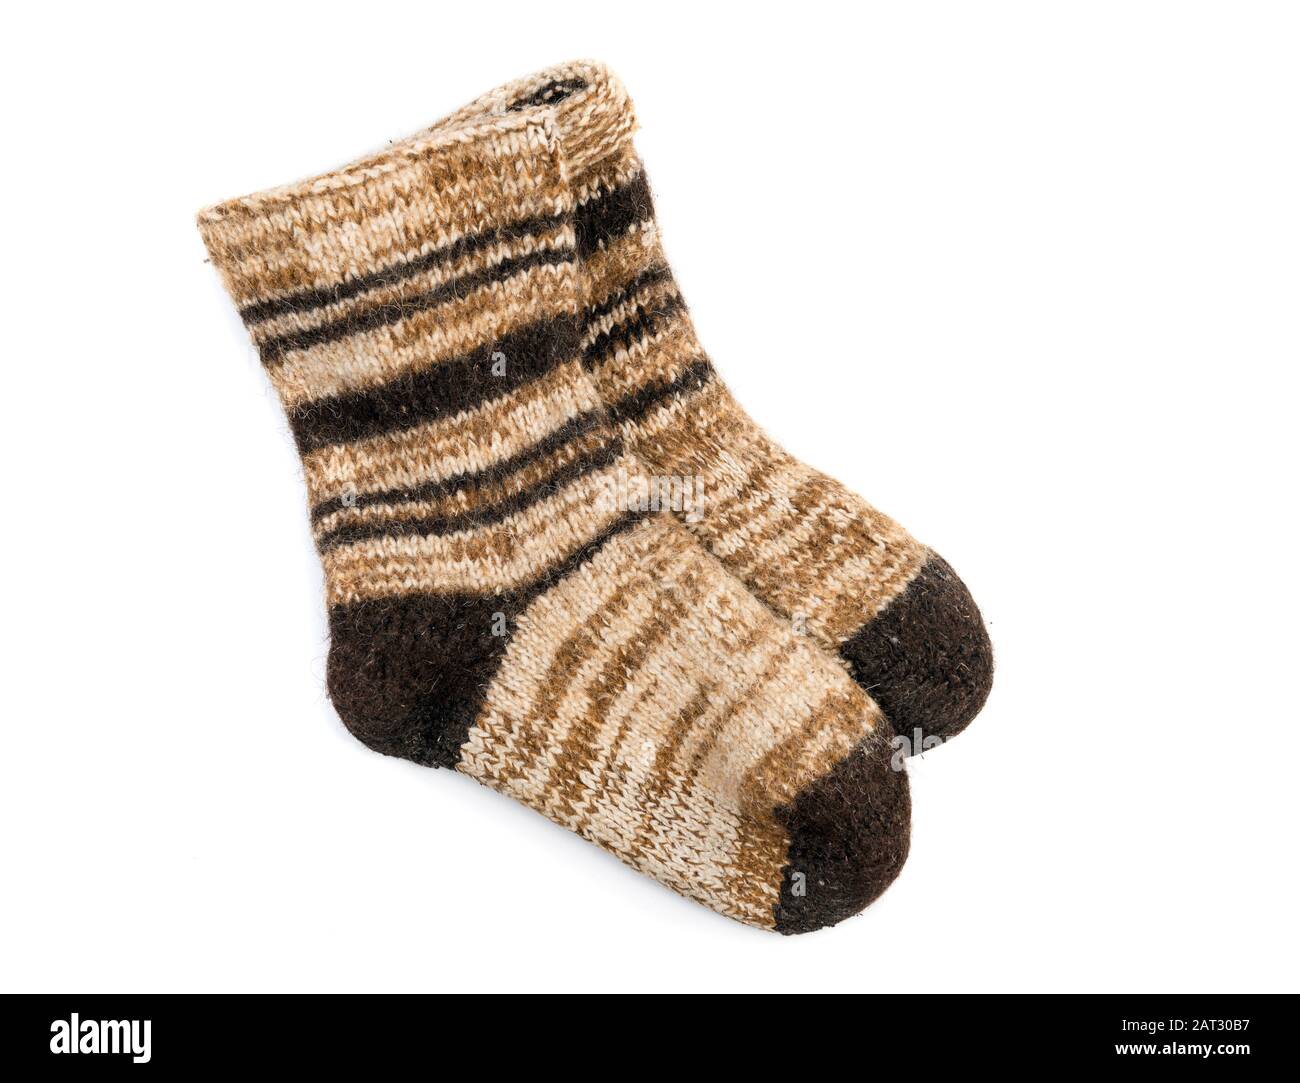 Very thick and warm hand-knitted dog wool socks Stock Photo